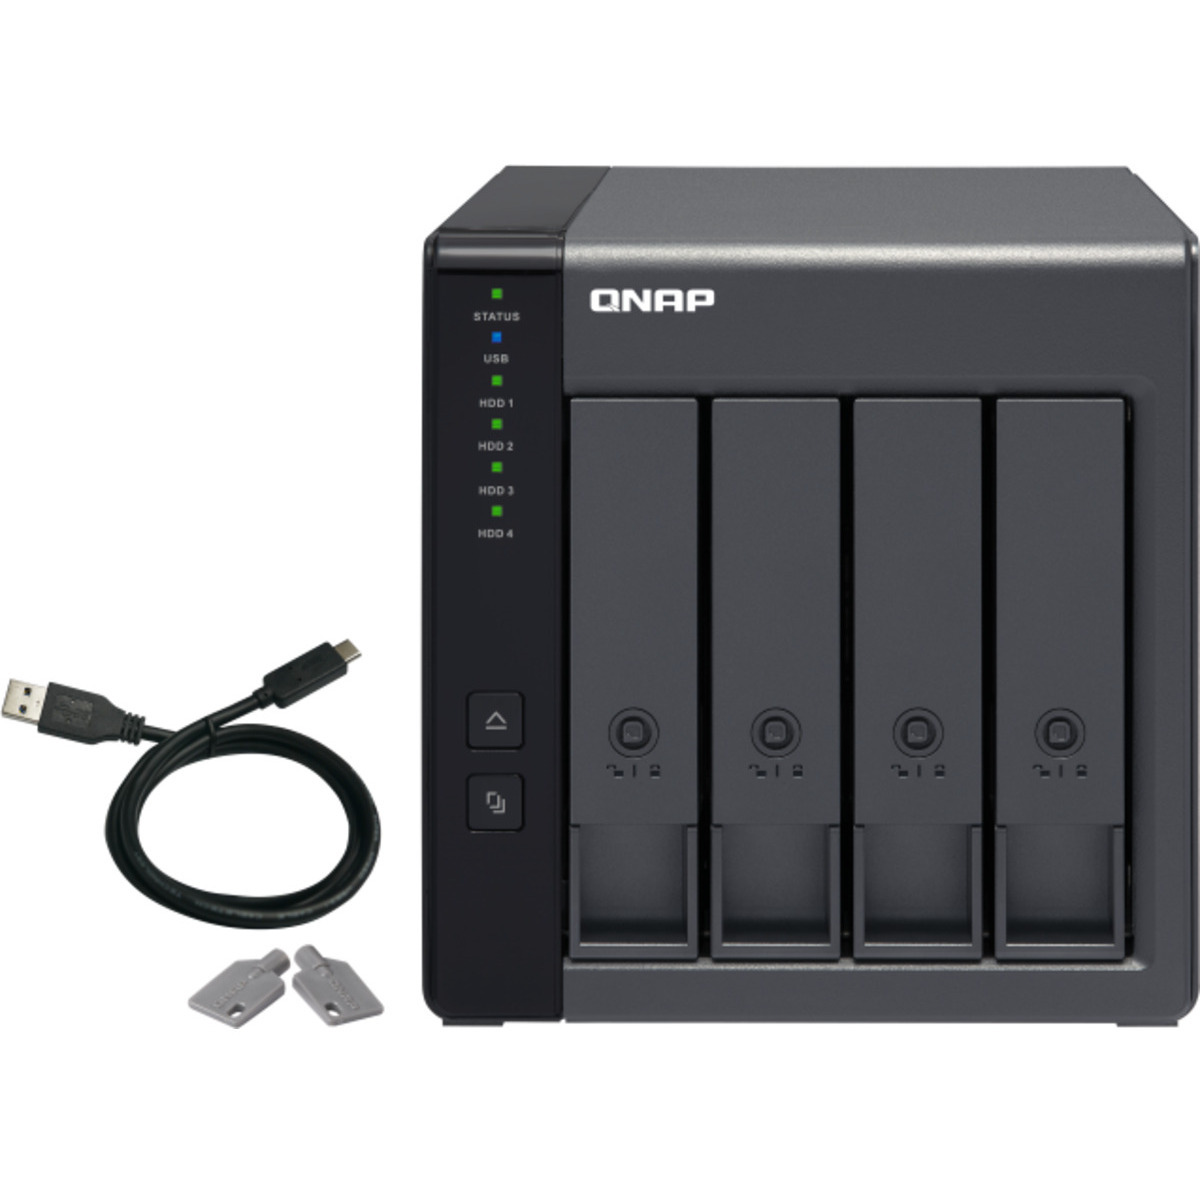 buy $1379 QNAP TR-004 External Expansion Drive 32tb Desktop Expansion Enclosure 4x8000gb Western Digital Gold WD8004FRYZ 3.5 7200rpm SATA 6Gb/s HDD ENTERPRISE Class Drives Installed - Burn-In Tested - nas headquarters buy network attached storage server device das new raid-5 free shipping simply usa TR-004 External Expansion Drive